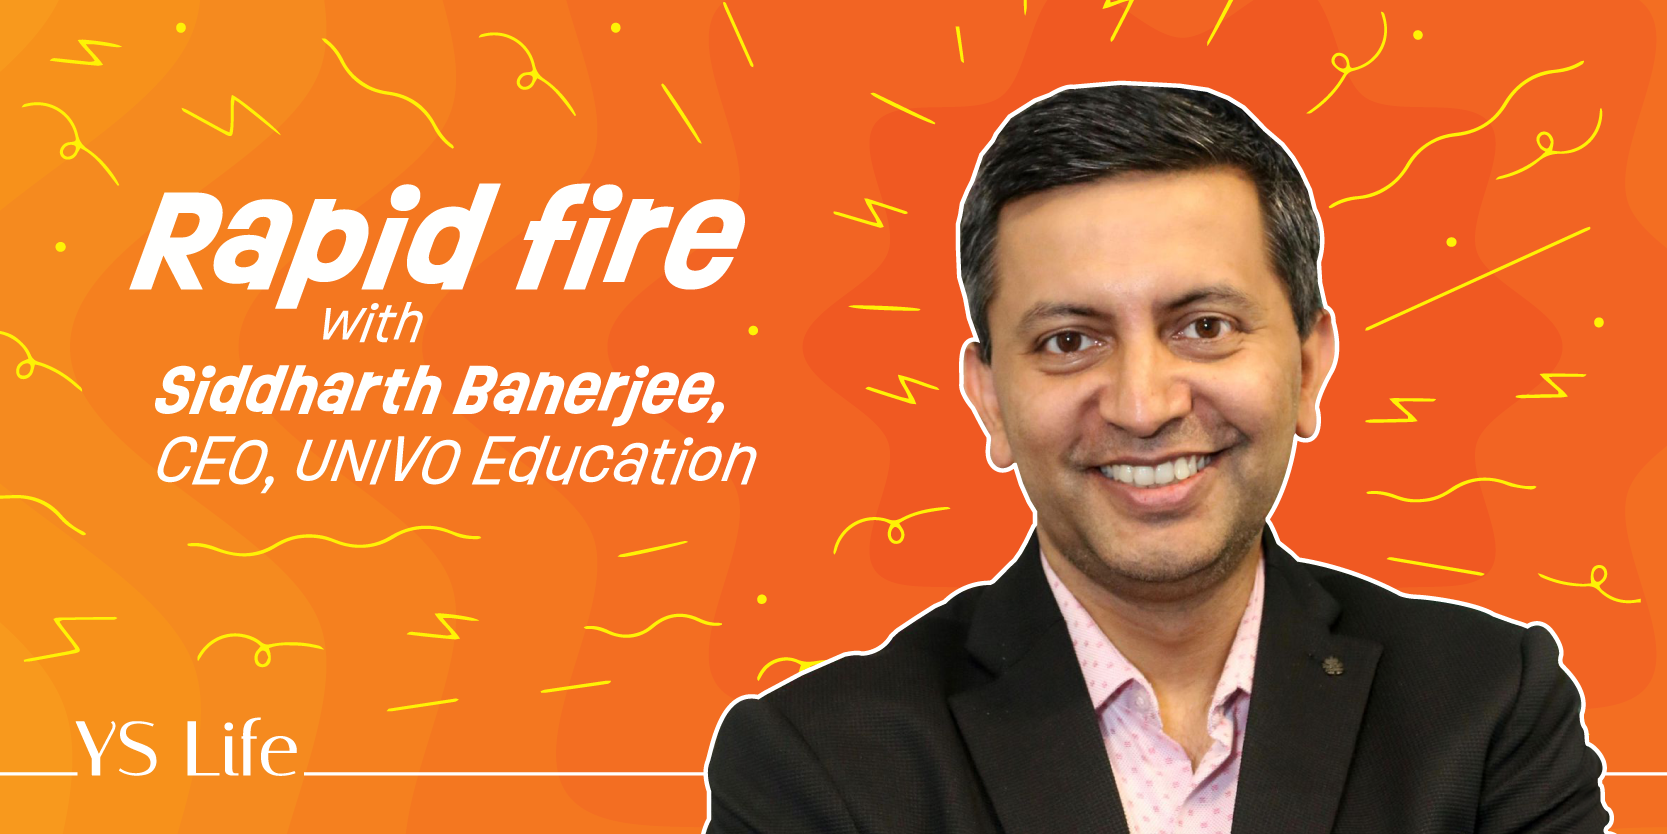 Rapid fire with Siddharth Banerjee, CEO at UNIVO Education